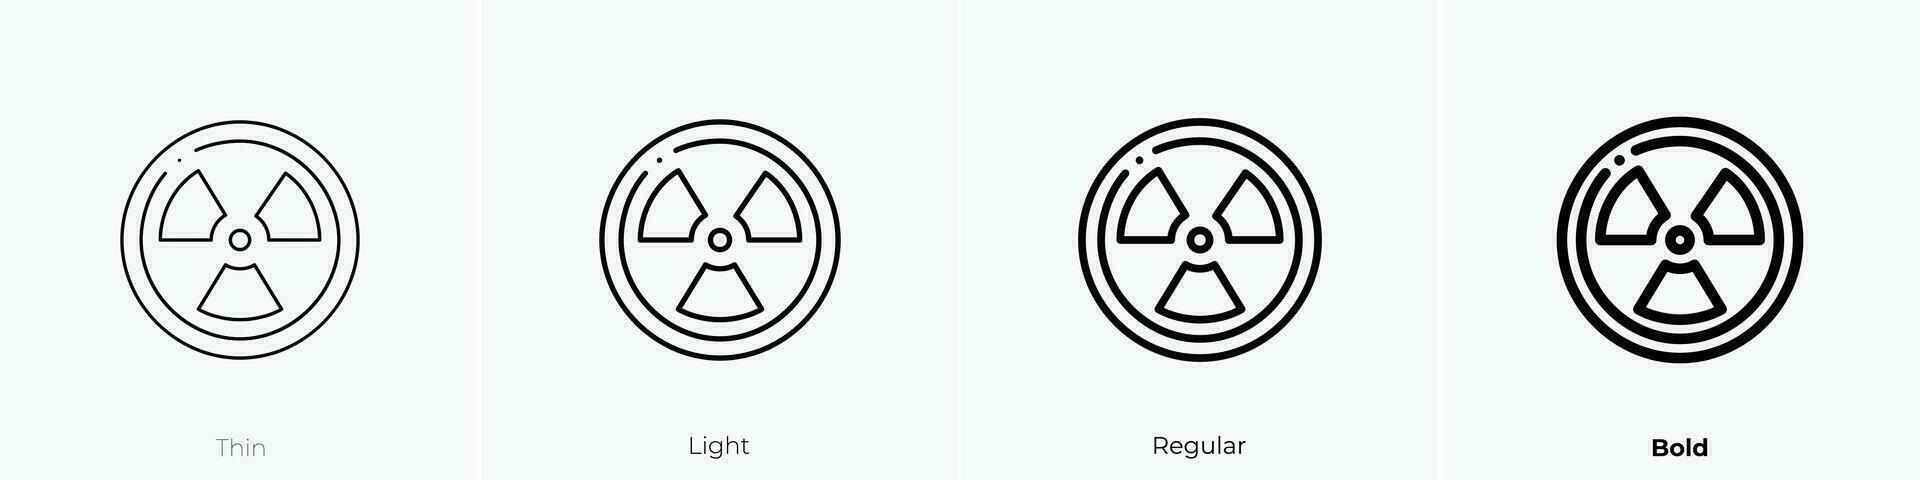 radiation icon. Thin, Light, Regular And Bold style design isolated on white background vector